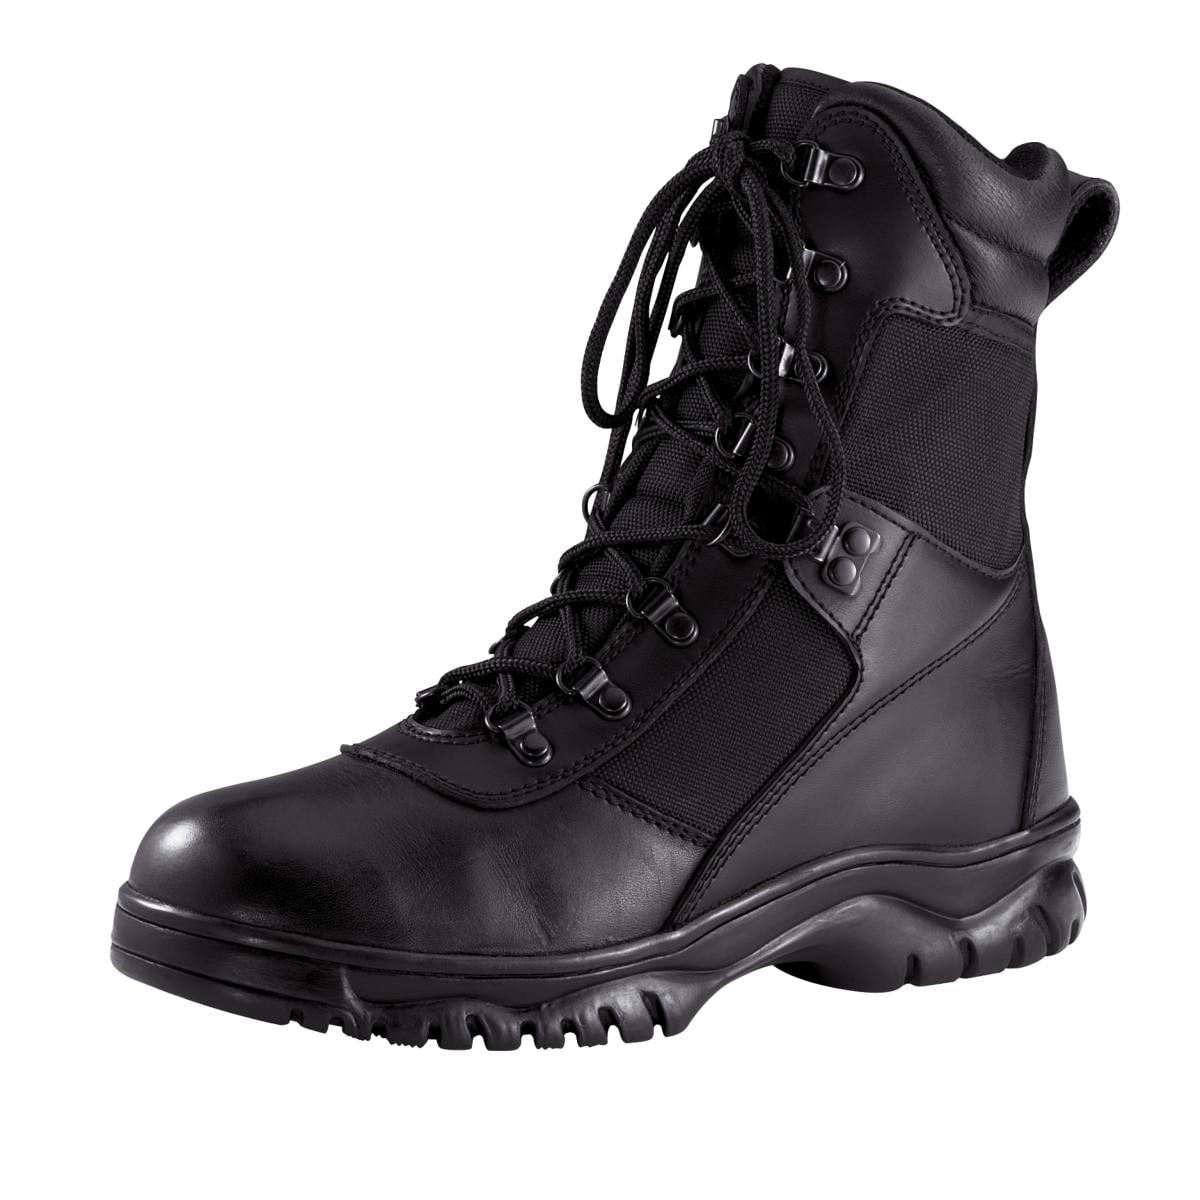 Rothco Forced Entry 5052 Black Tactical 